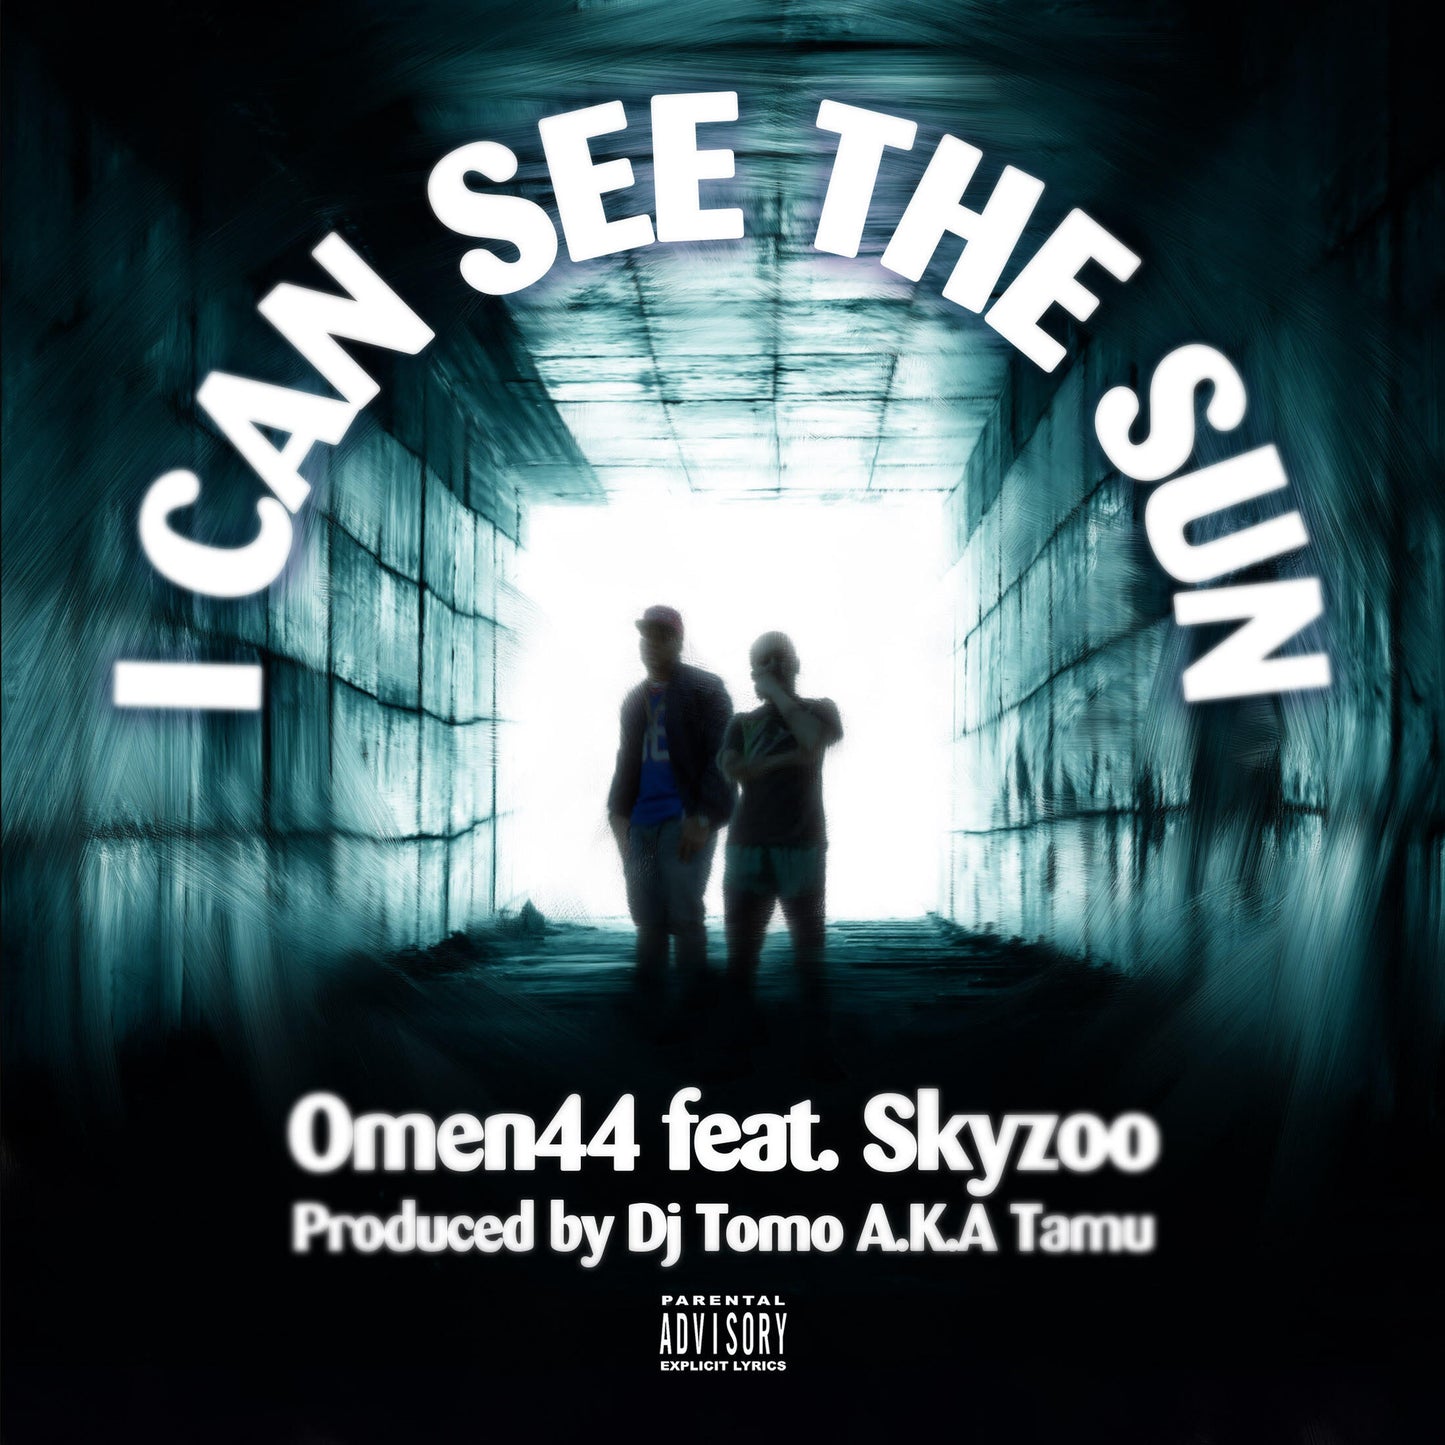 【7"】Omen44 - I Can See The Sun feat. Skyzoo Produced by Dj Tomo a.k.a. Tamu